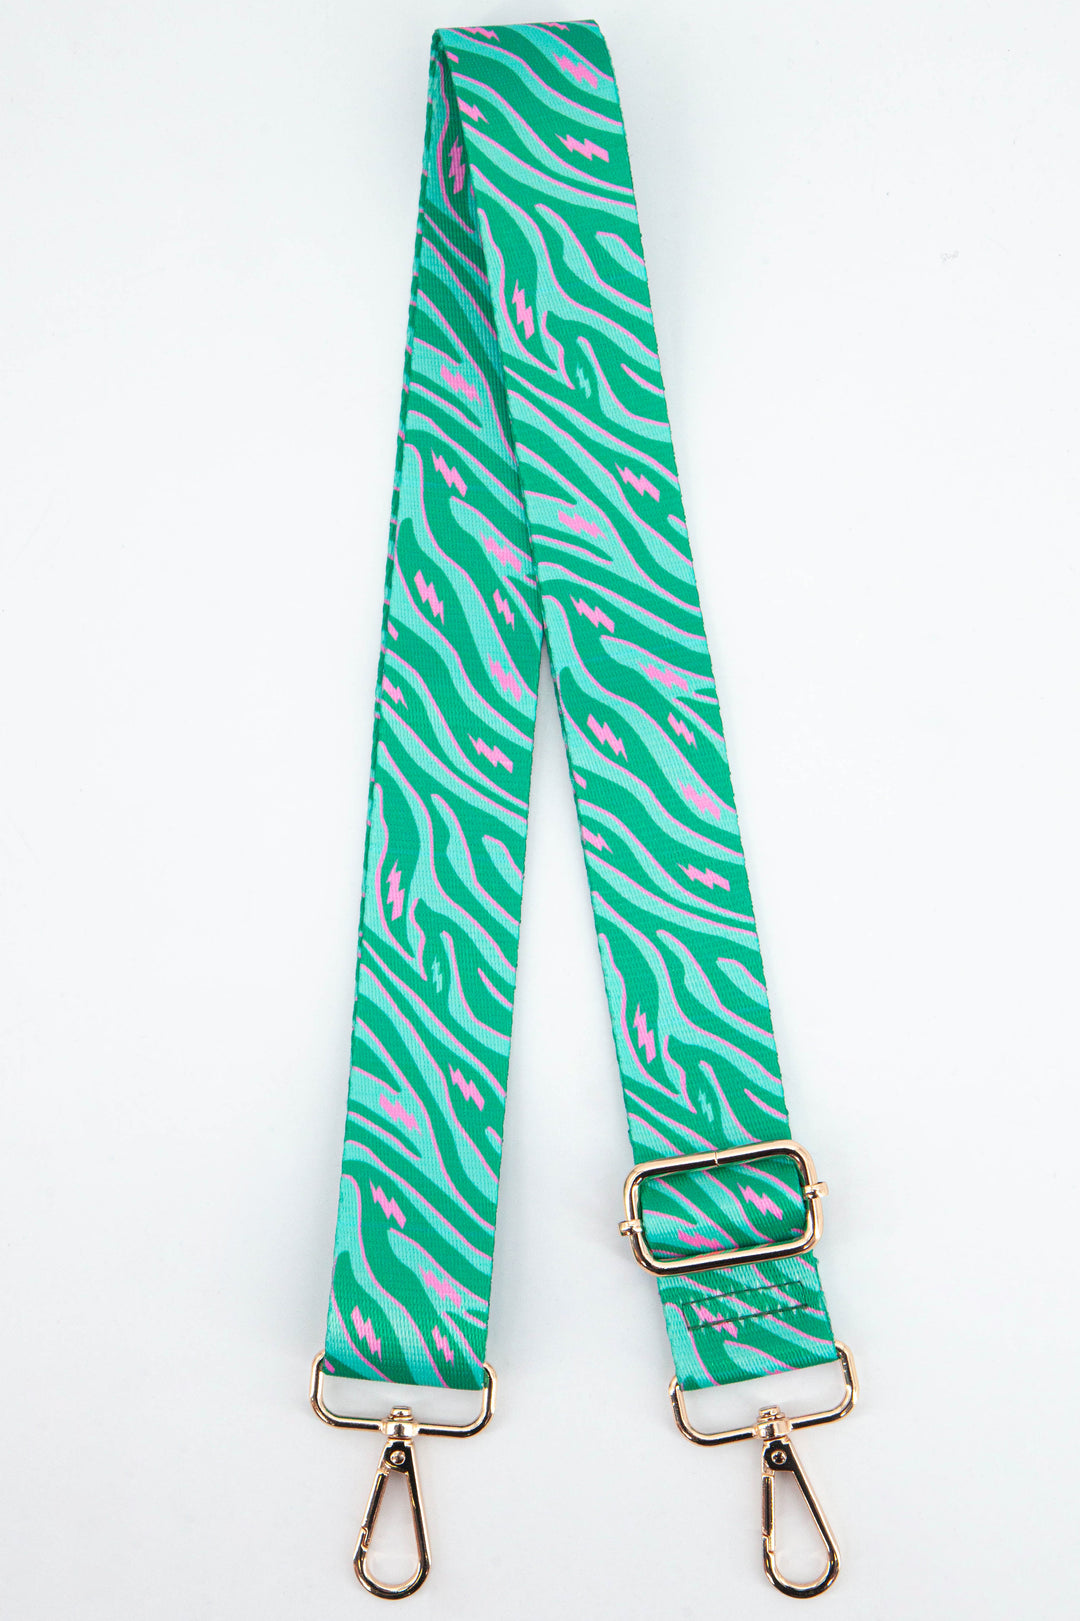 green zebra print bag strap with contrasting pink lightning bolts with gold metal clip on snap hooks